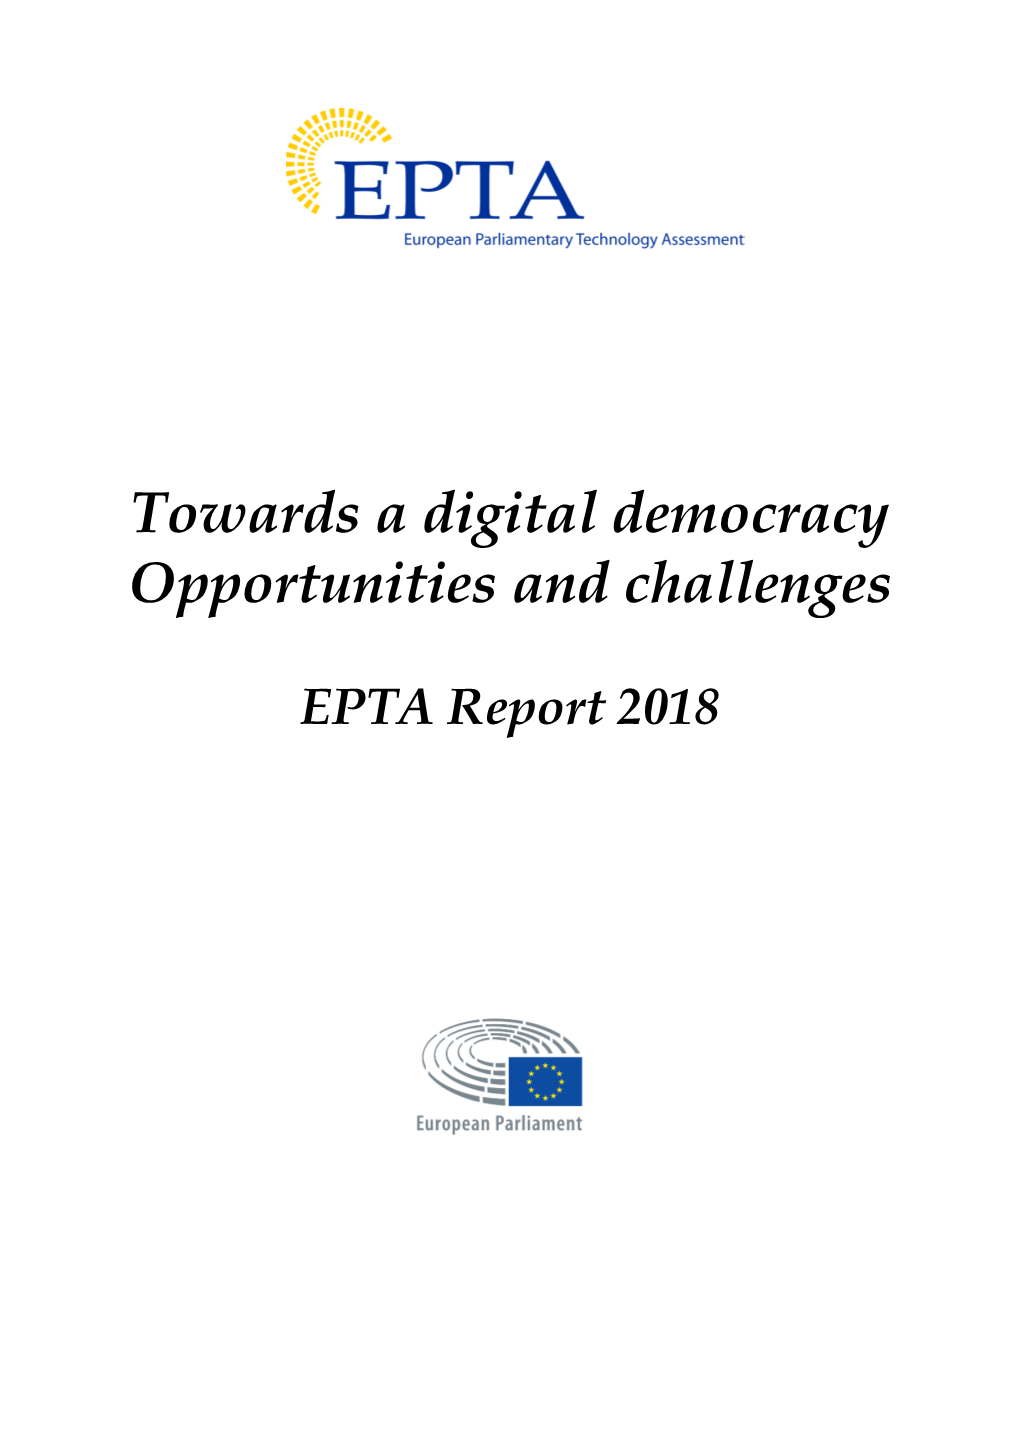 2018: Towards a Digital Democracy Opportunities and Challenges